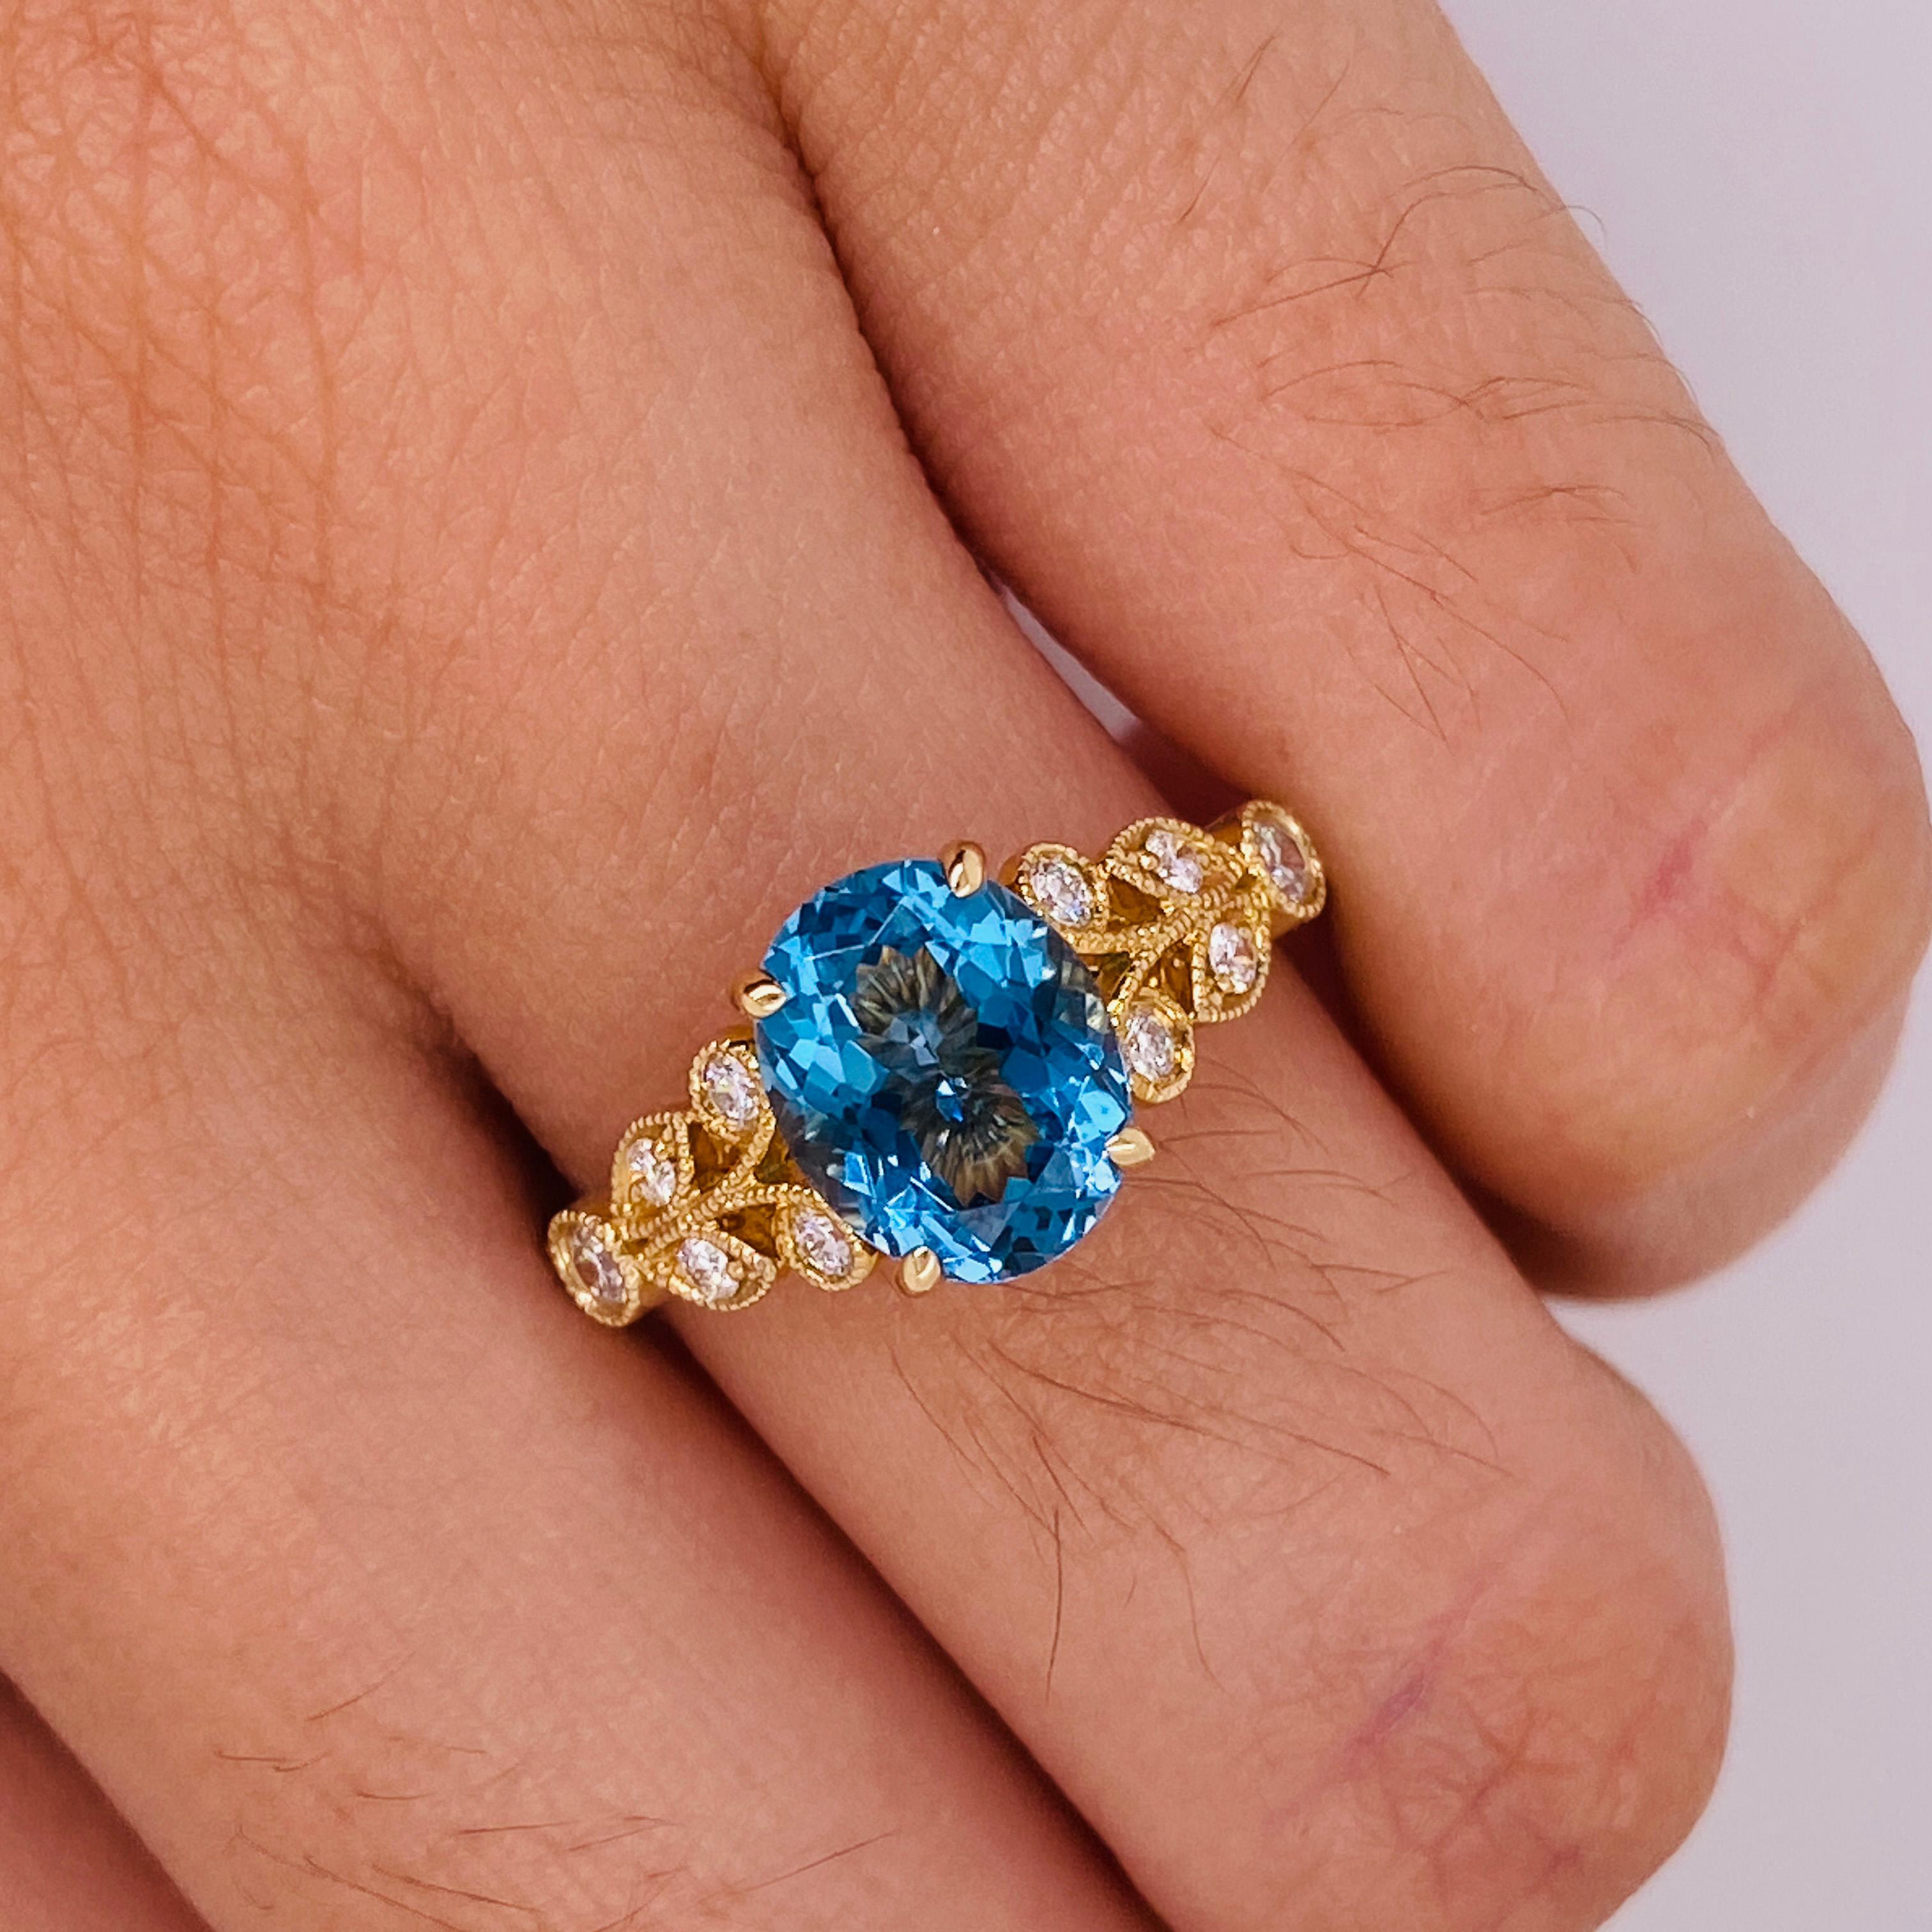 2 Carat Blue Zircon with Diamonds Nature-Inspired Ring in 14K Yellow Gold For Sale 2